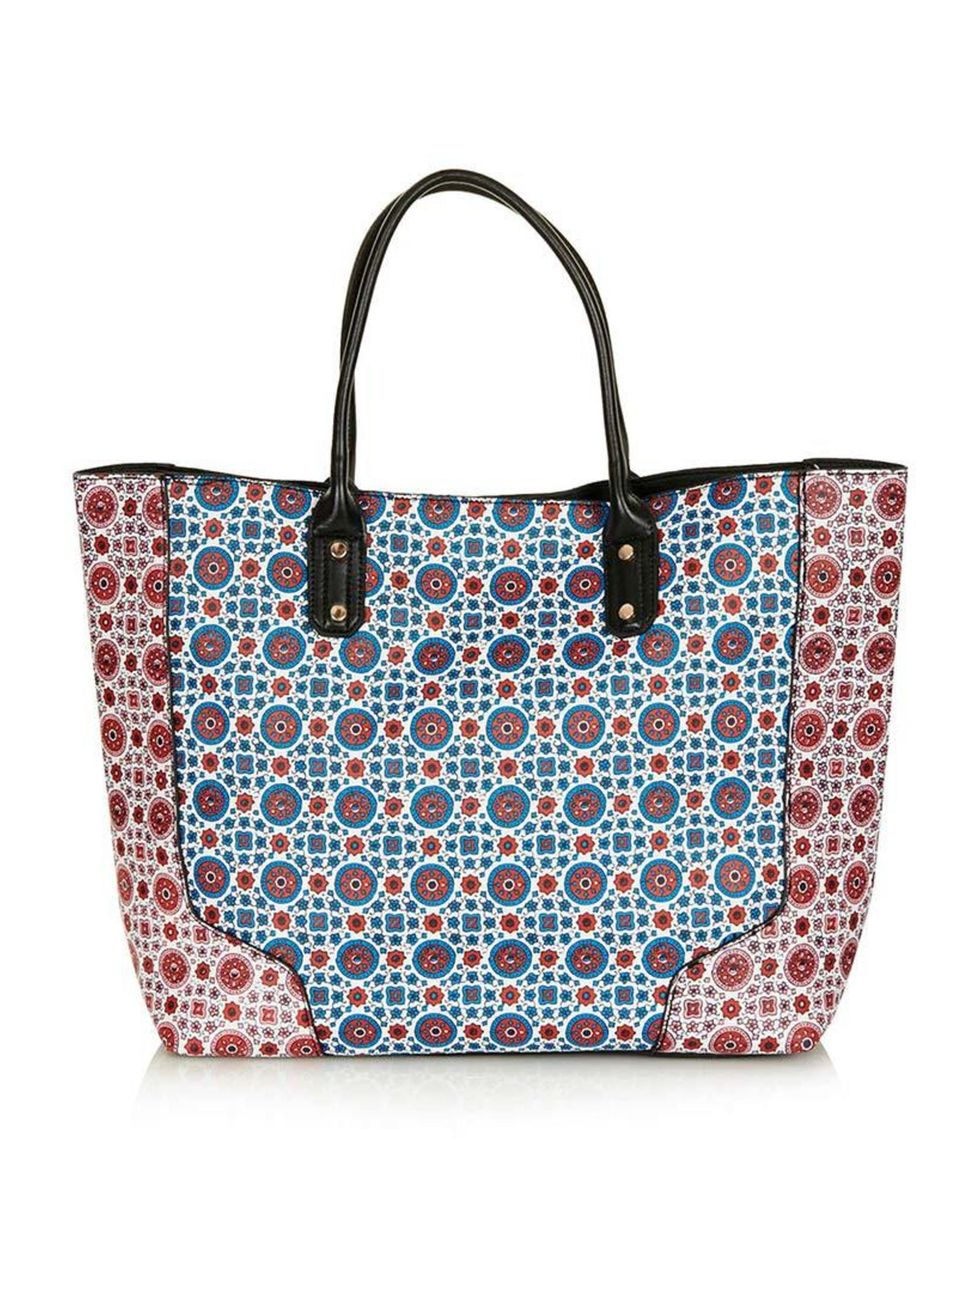 <p>City suitable or beach ready..This tote is ready for both..</p><p>Tote £36 by <a href="http://www.topshop.com/en/tsuk/product/bags-accessories-1702216/bags-purses-462/tile-print-saffiano-tote-bag-2964375?bi=1&amp;ps=200">Topshop</a></p>